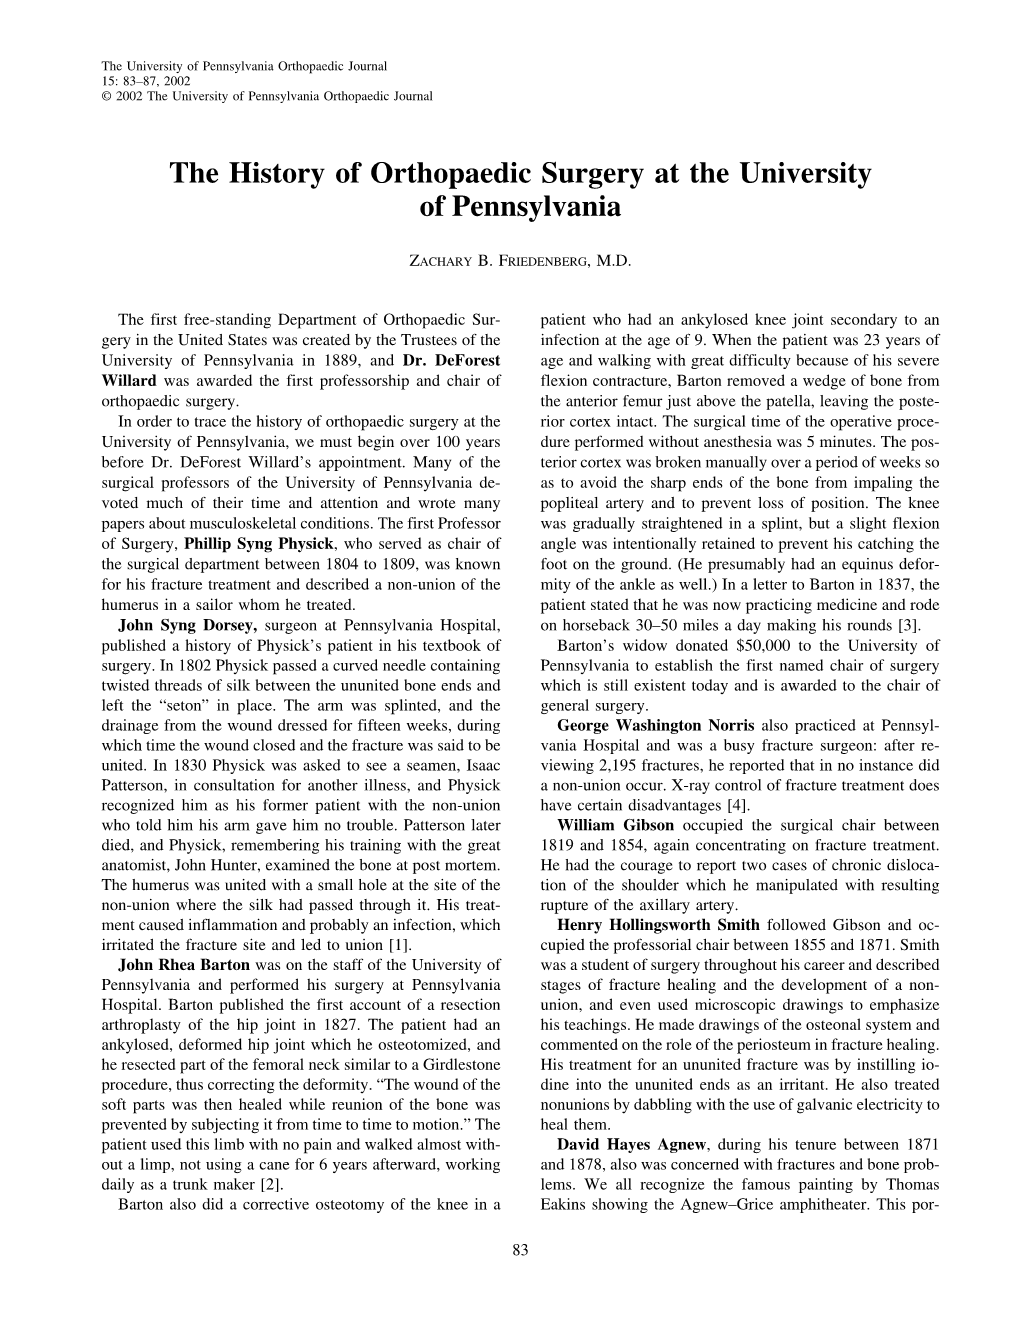 The History of Orthopaedic Surgery at the University of Pennsylvania